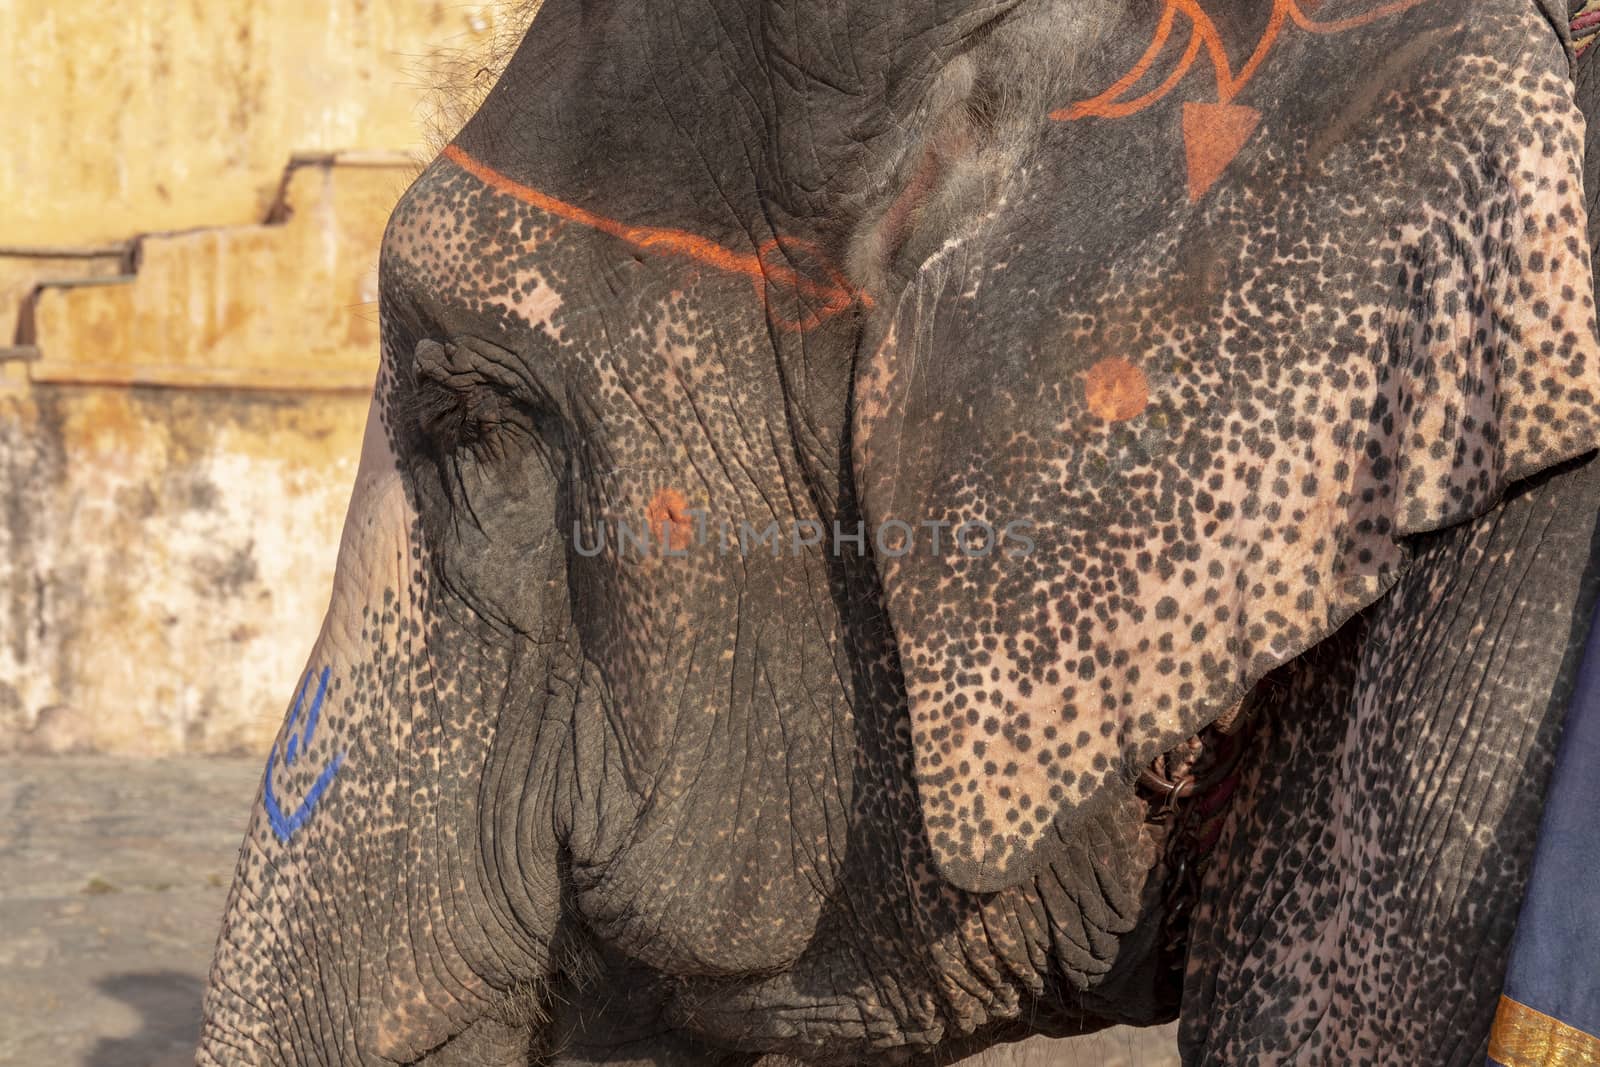 Close up Decorated elephant at the annual elephant festival in Jaipur, India